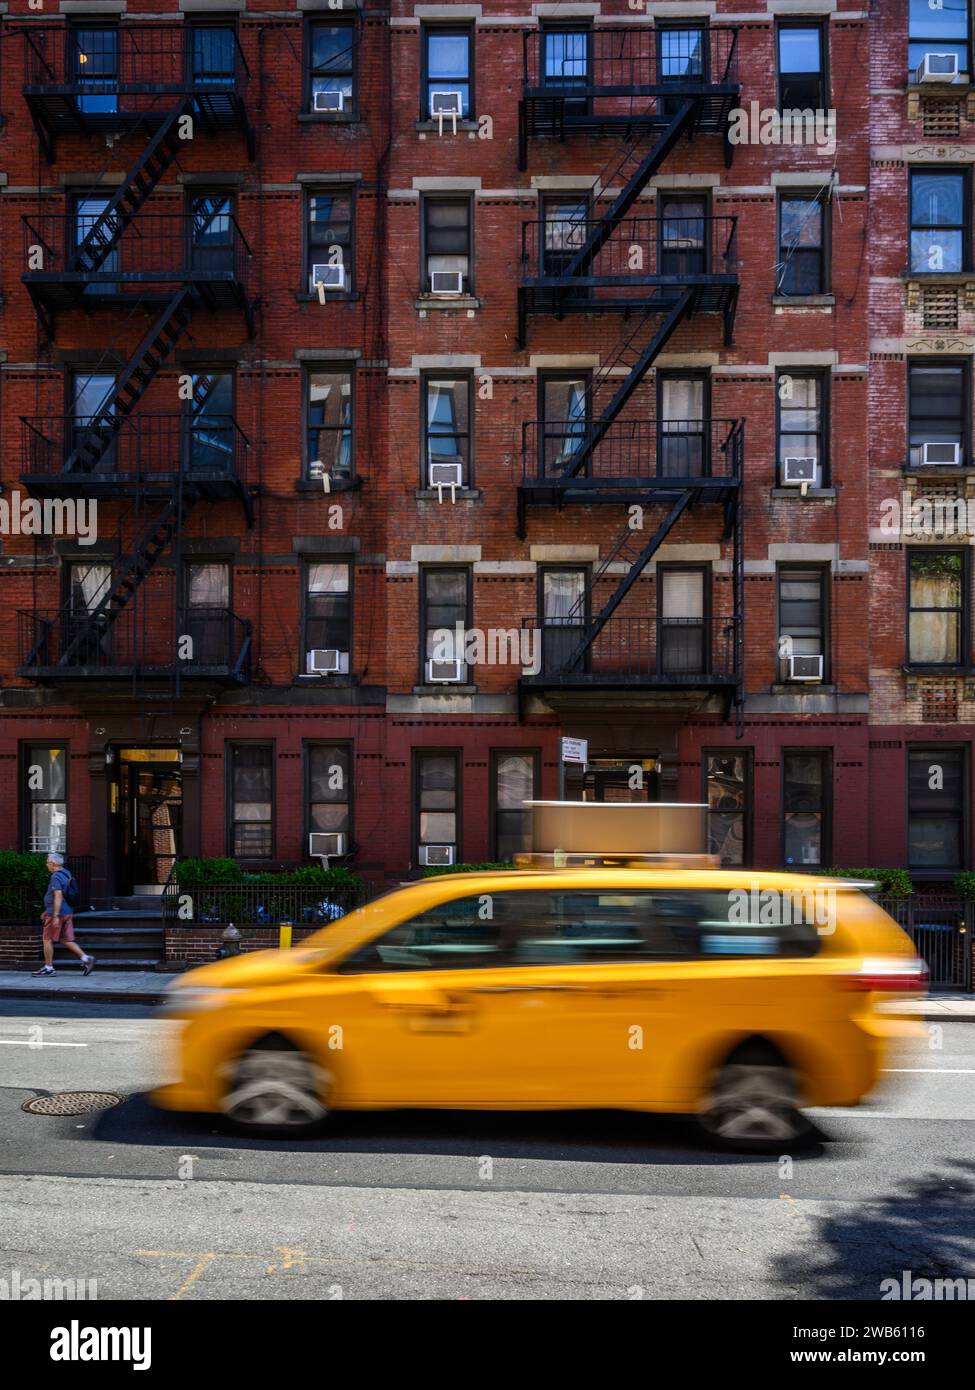 Typical old New York building with metal fire escape stairs with a yellow cab moving down the street. Stock Photo